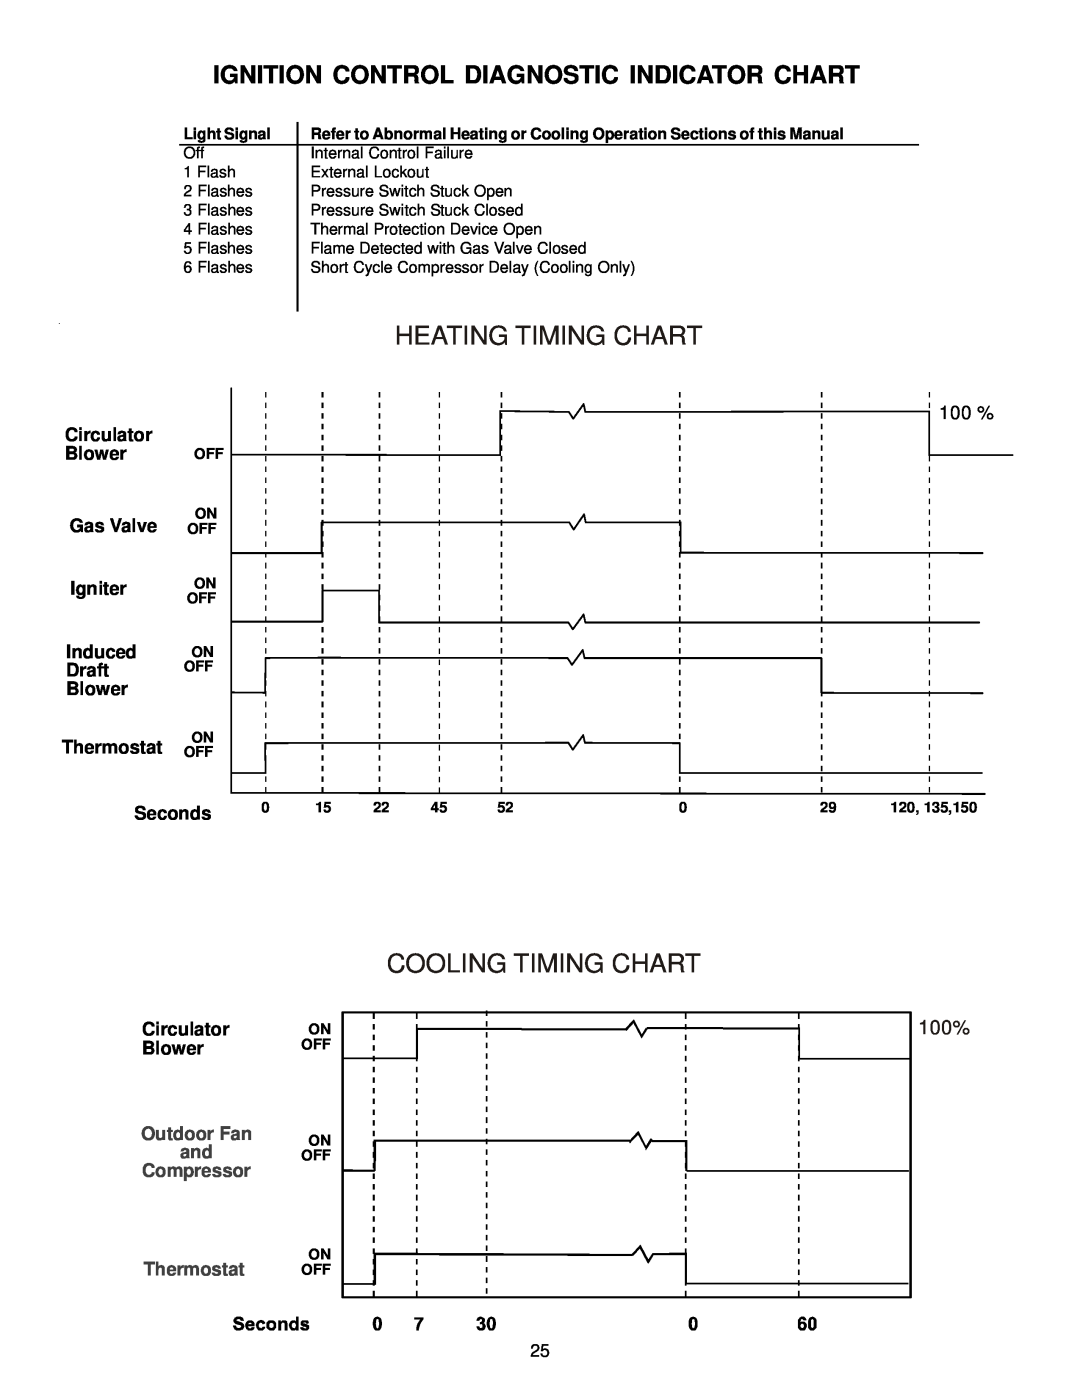 Goodman Mfg A/GPG13 M Heating Timing Chart, Cooling Timing Chart, Ignition Control Diagnostic Indicator Chart, 100%, 100 % 